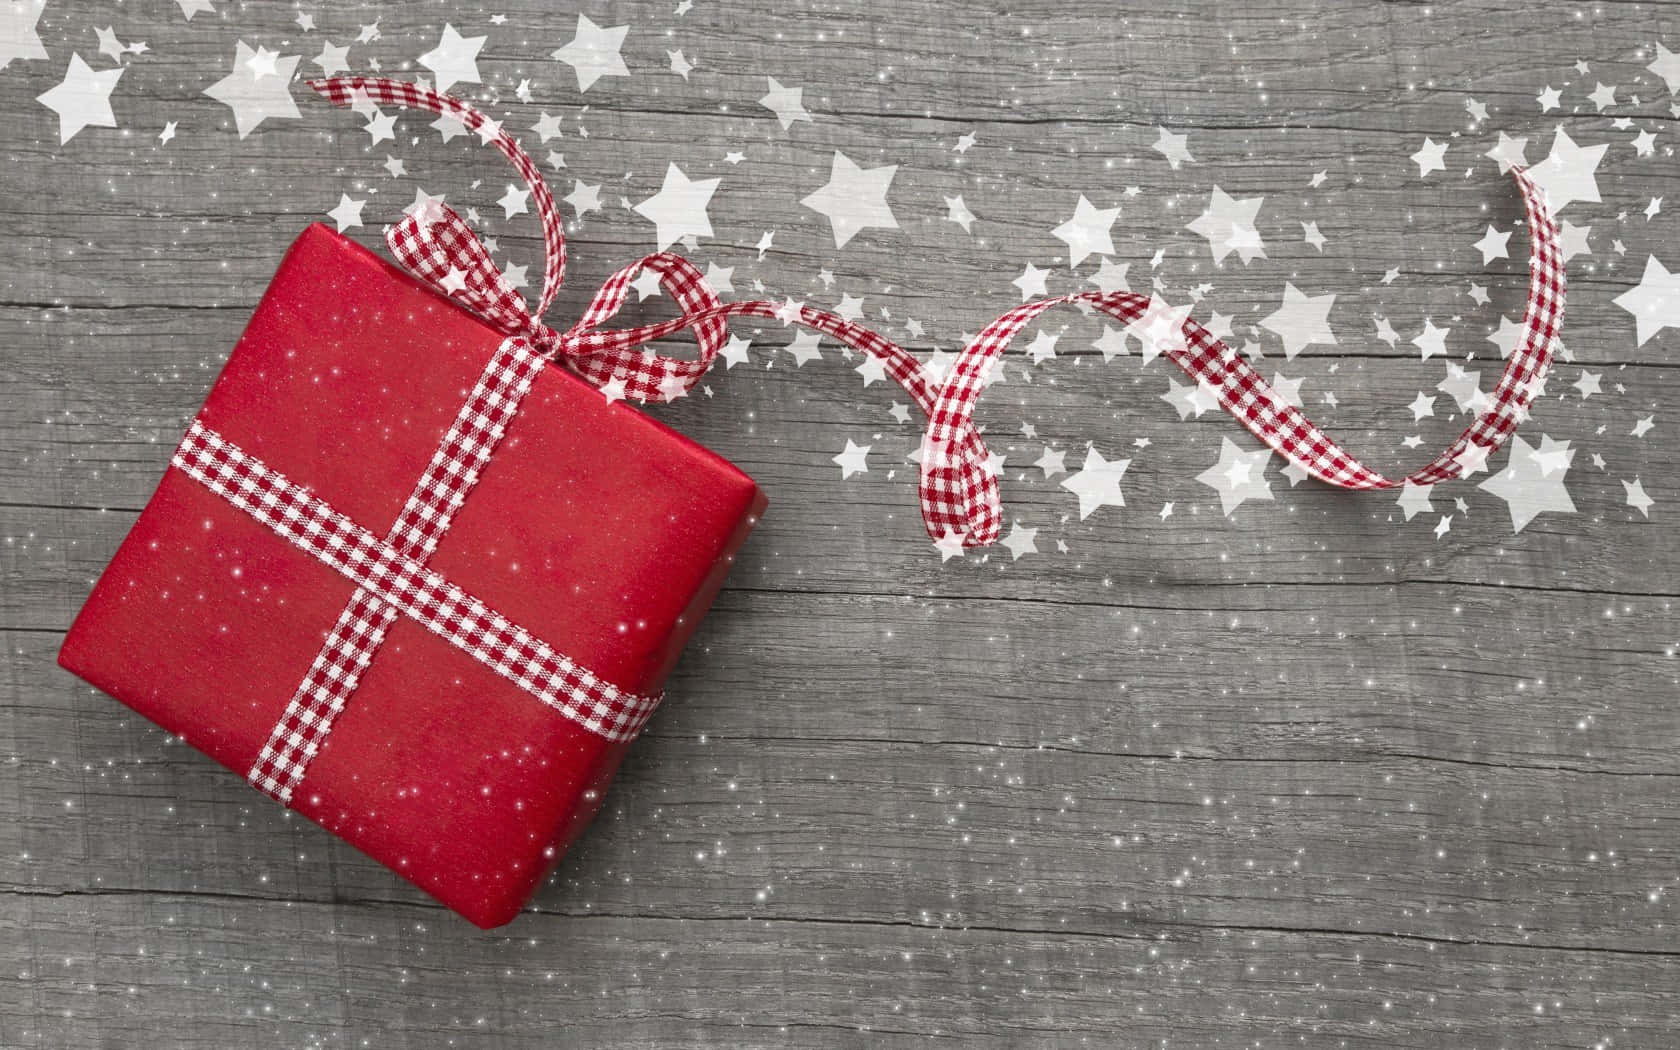 A charming red gift box adorned with twinkling cute stars. Wallpaper